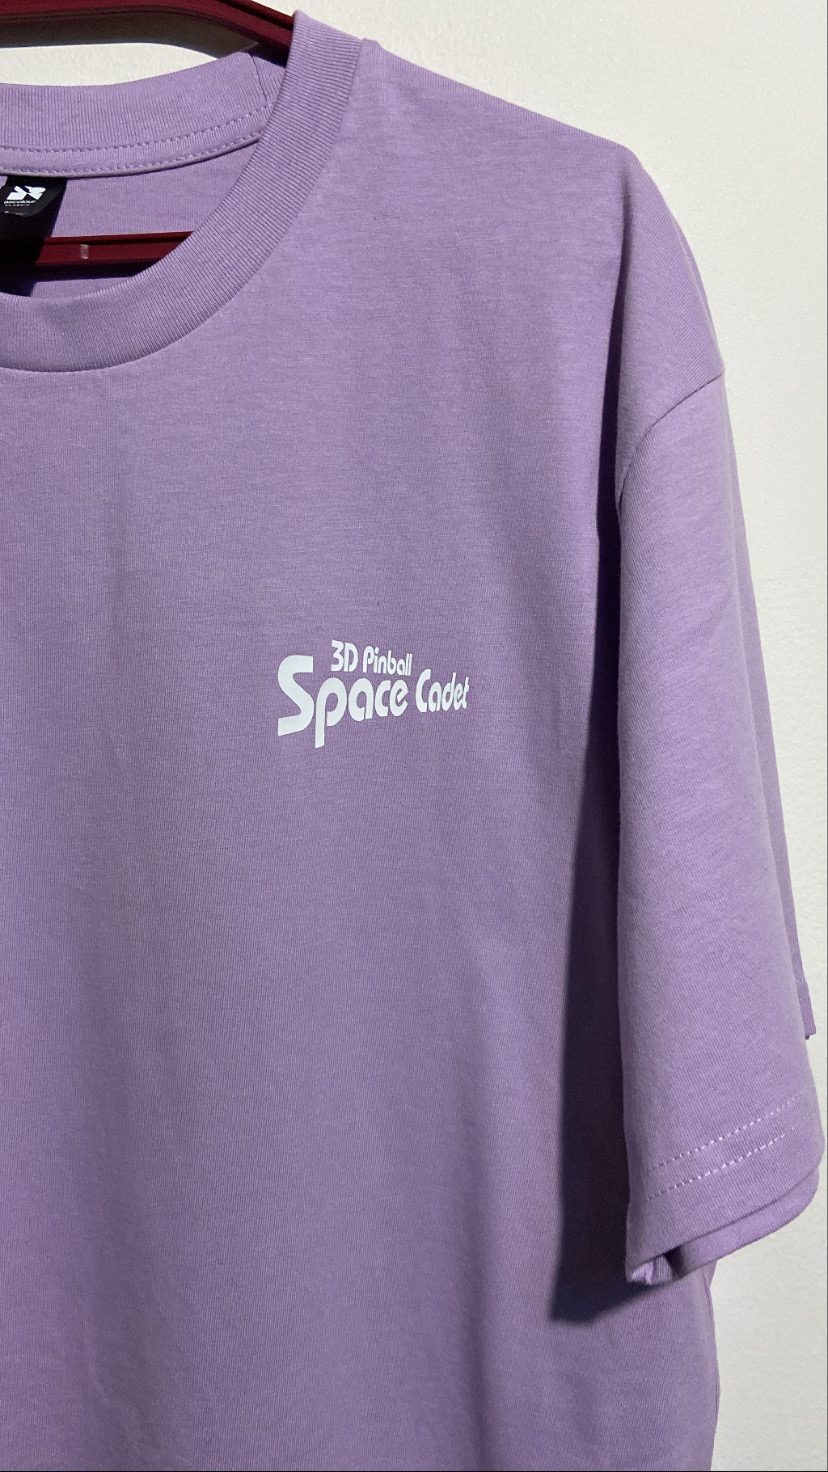 Space Cadet t-shirt front